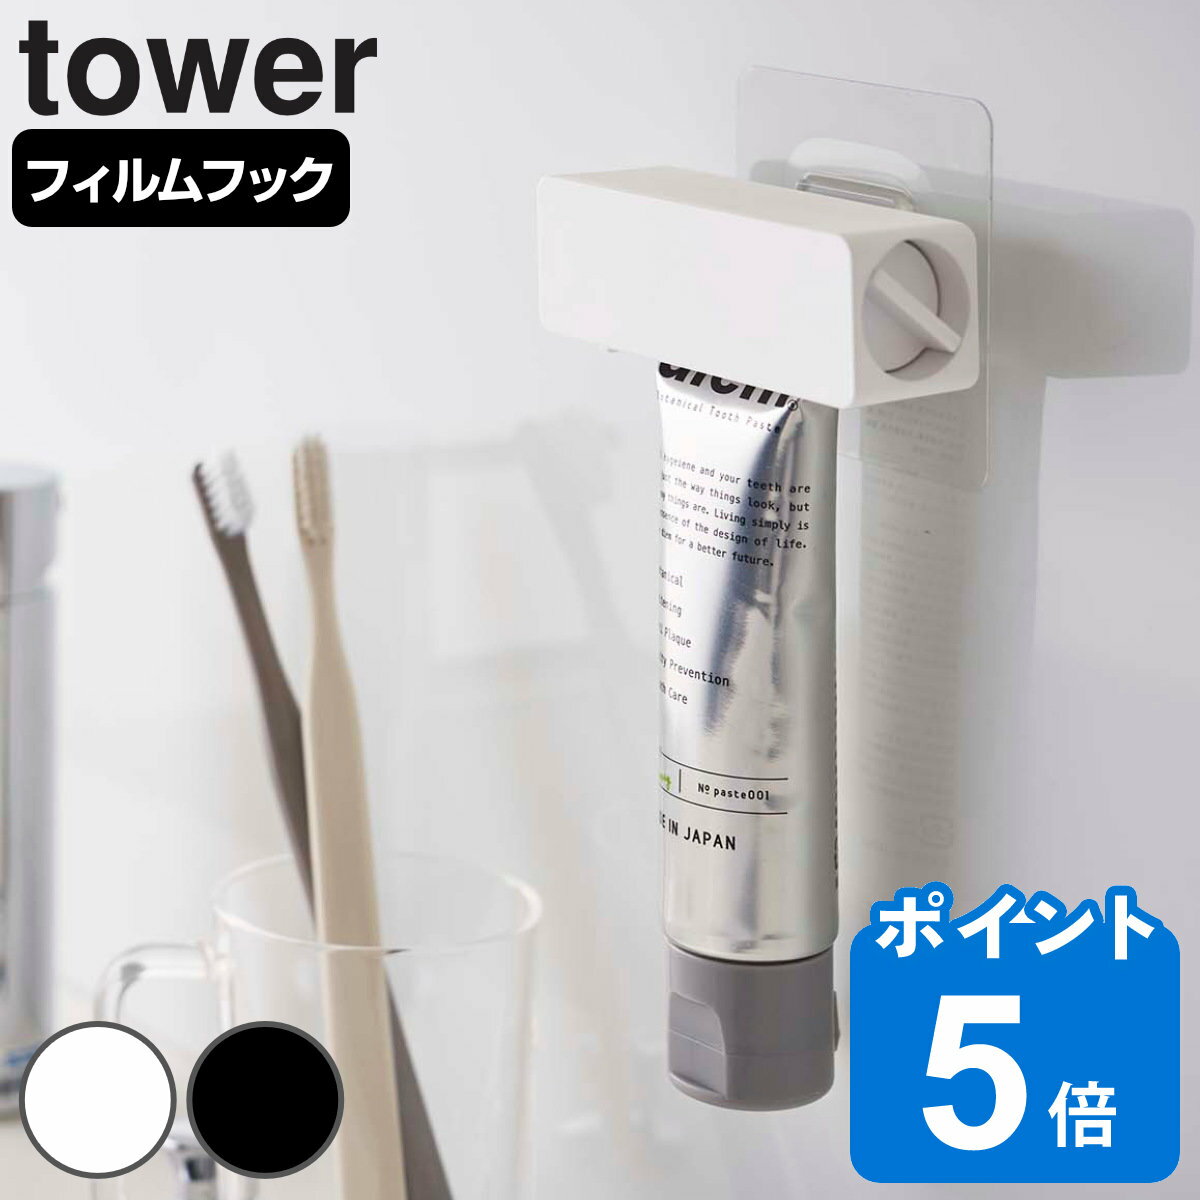 tower フィルムフック 歯磨き粉チュ